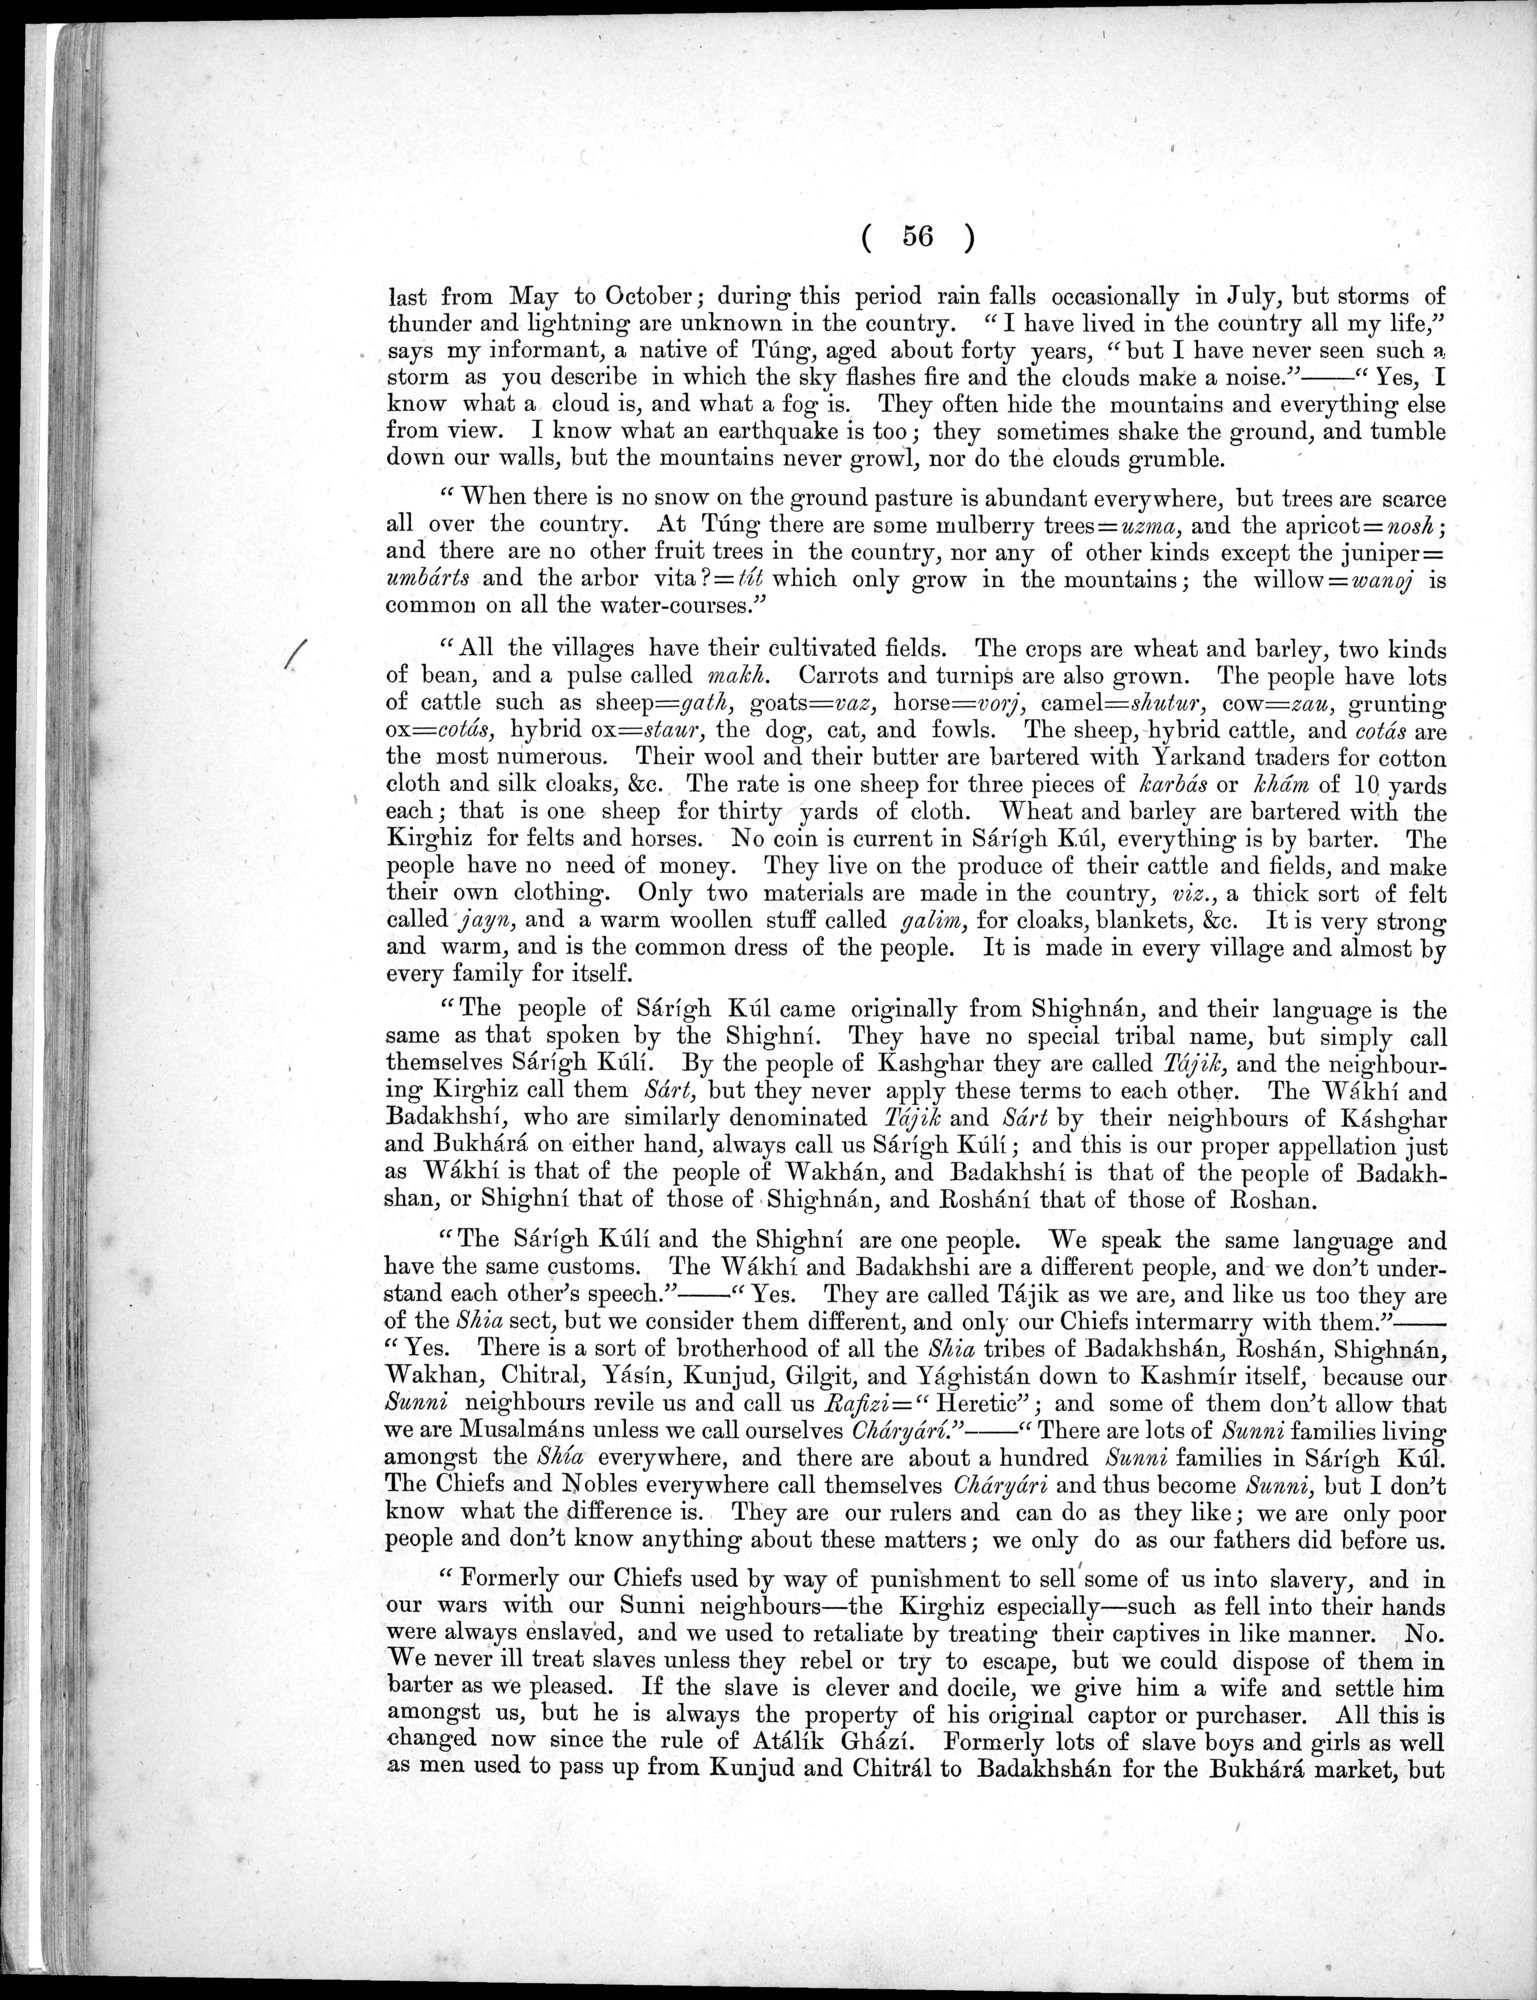 Report of a Mission to Yarkund in 1873 : vol.1 / Page 96 (Grayscale High Resolution Image)